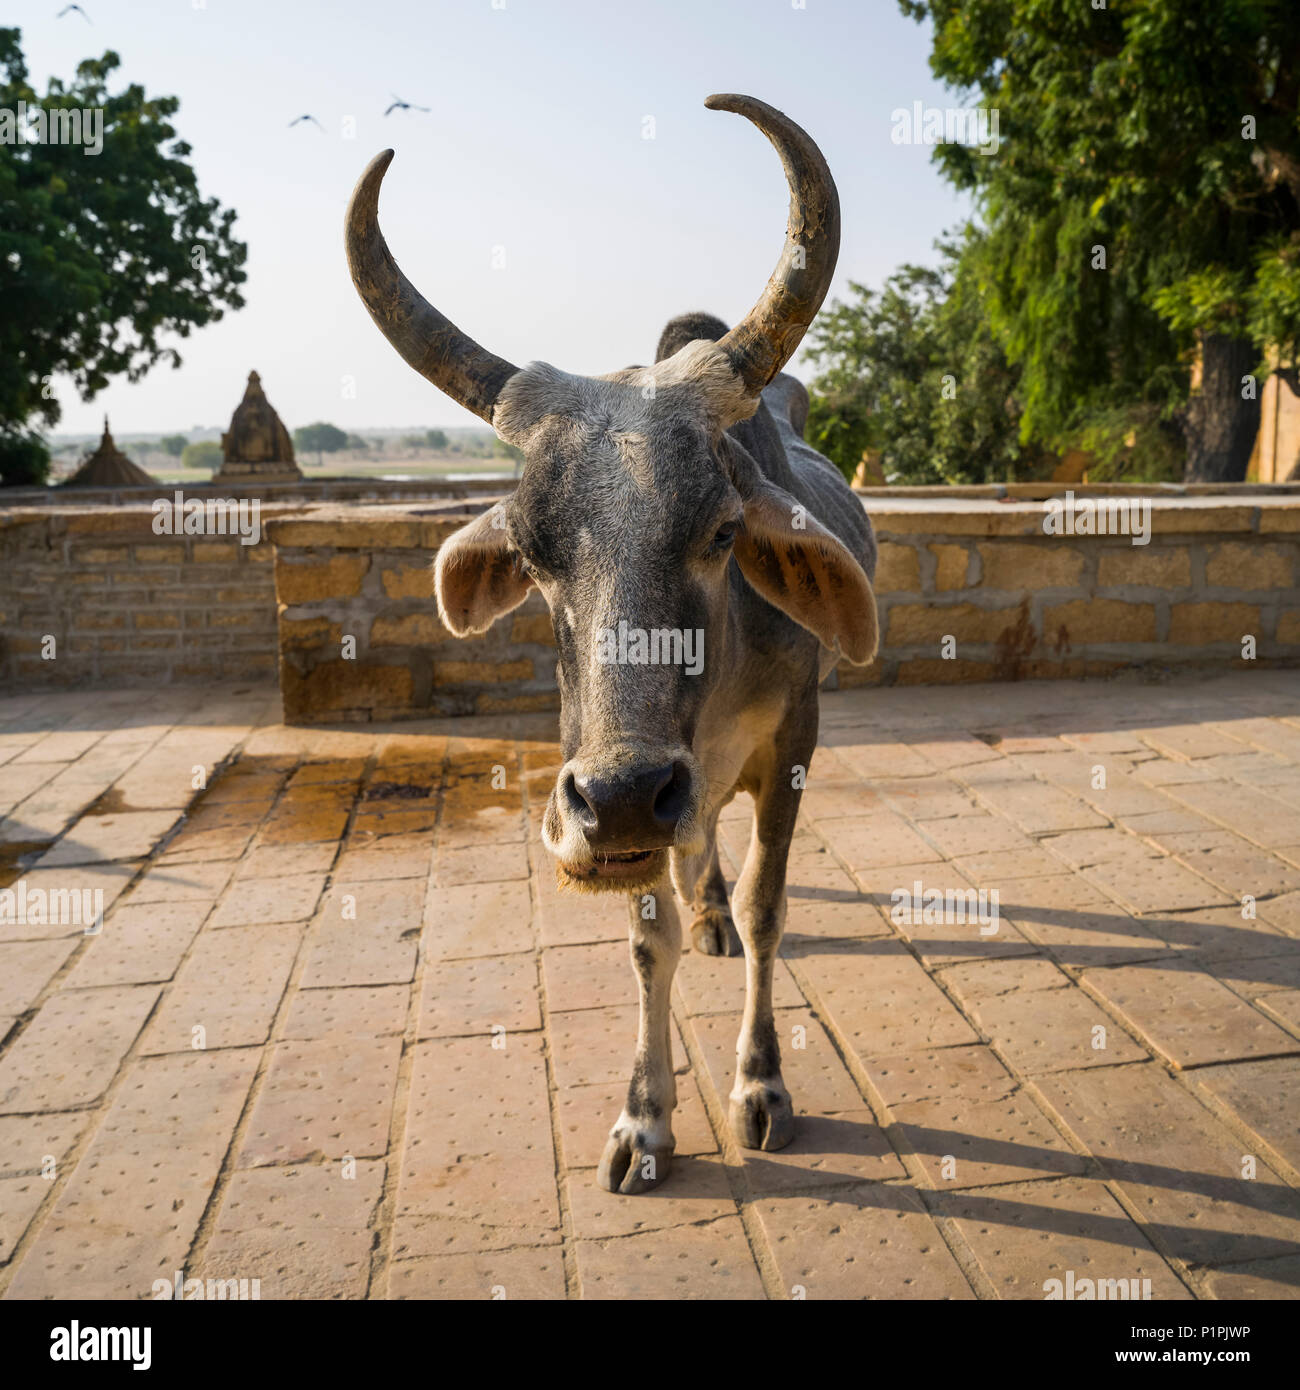 A cow with horns looking at the camera; Jaisalmer, Rajasthan, India Stock Photo